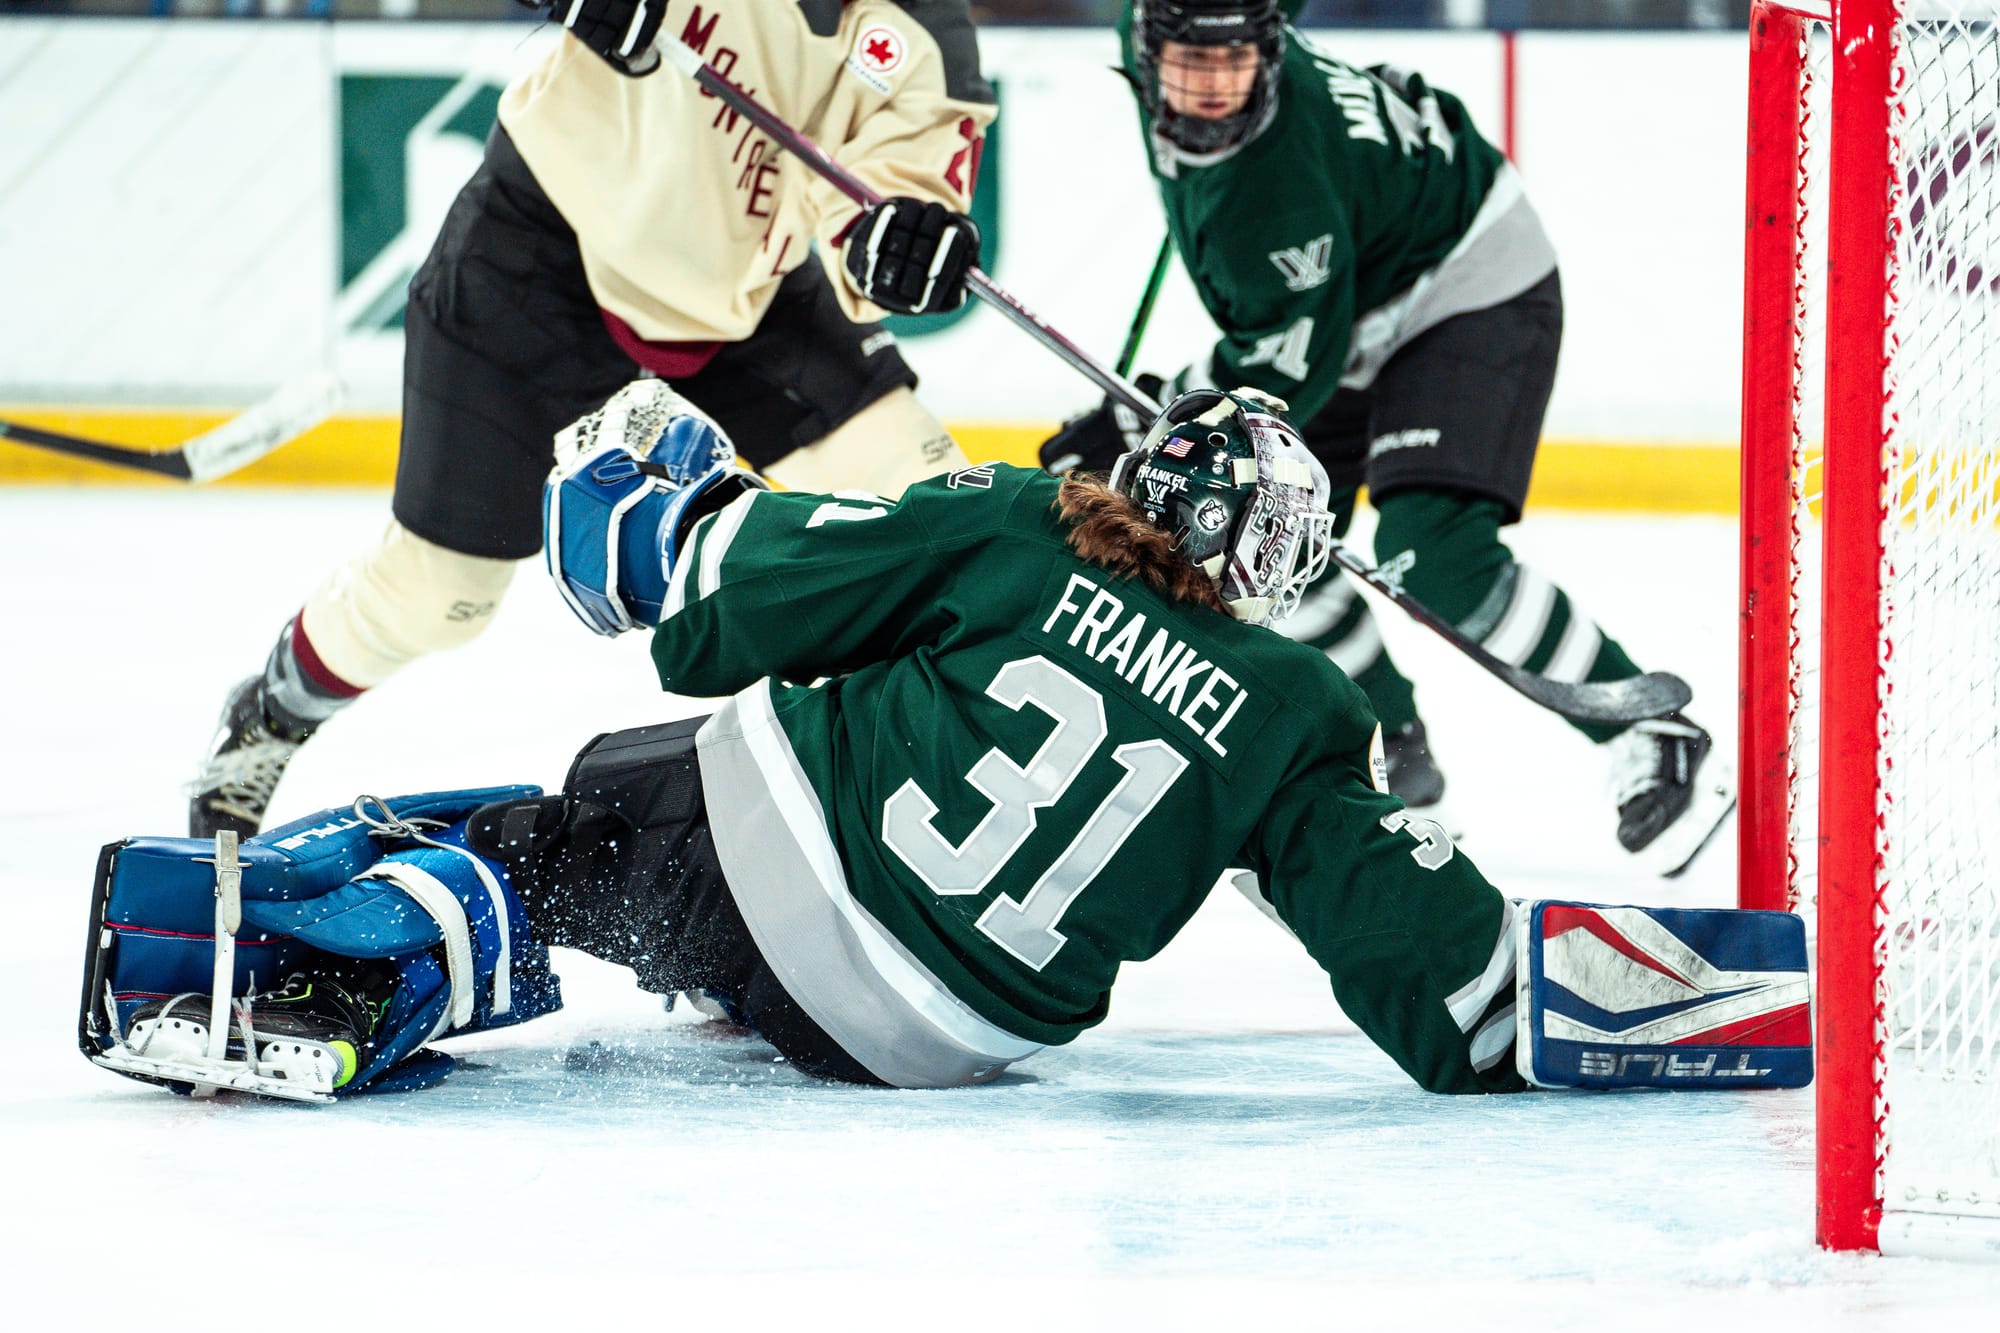 Aerin Frankel makes a diving save against Montréal. She is wearing a green home uniform, green and white Boston mask, and red/white/blue pads.